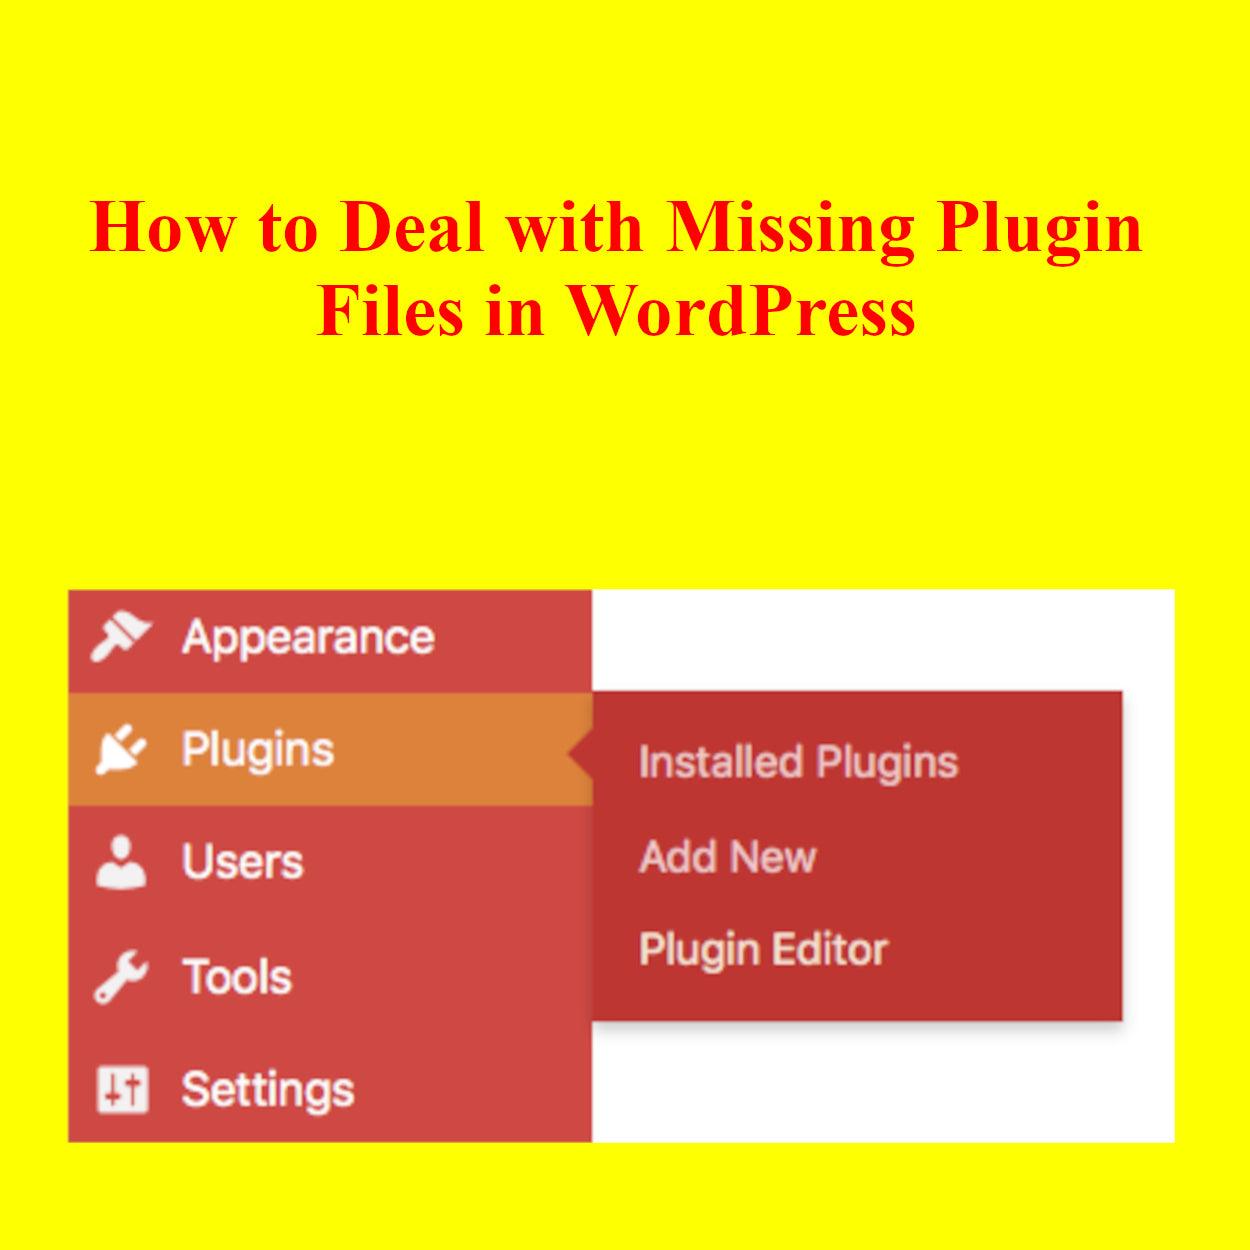 How to Deal with Missing Plugin Files in WordPress